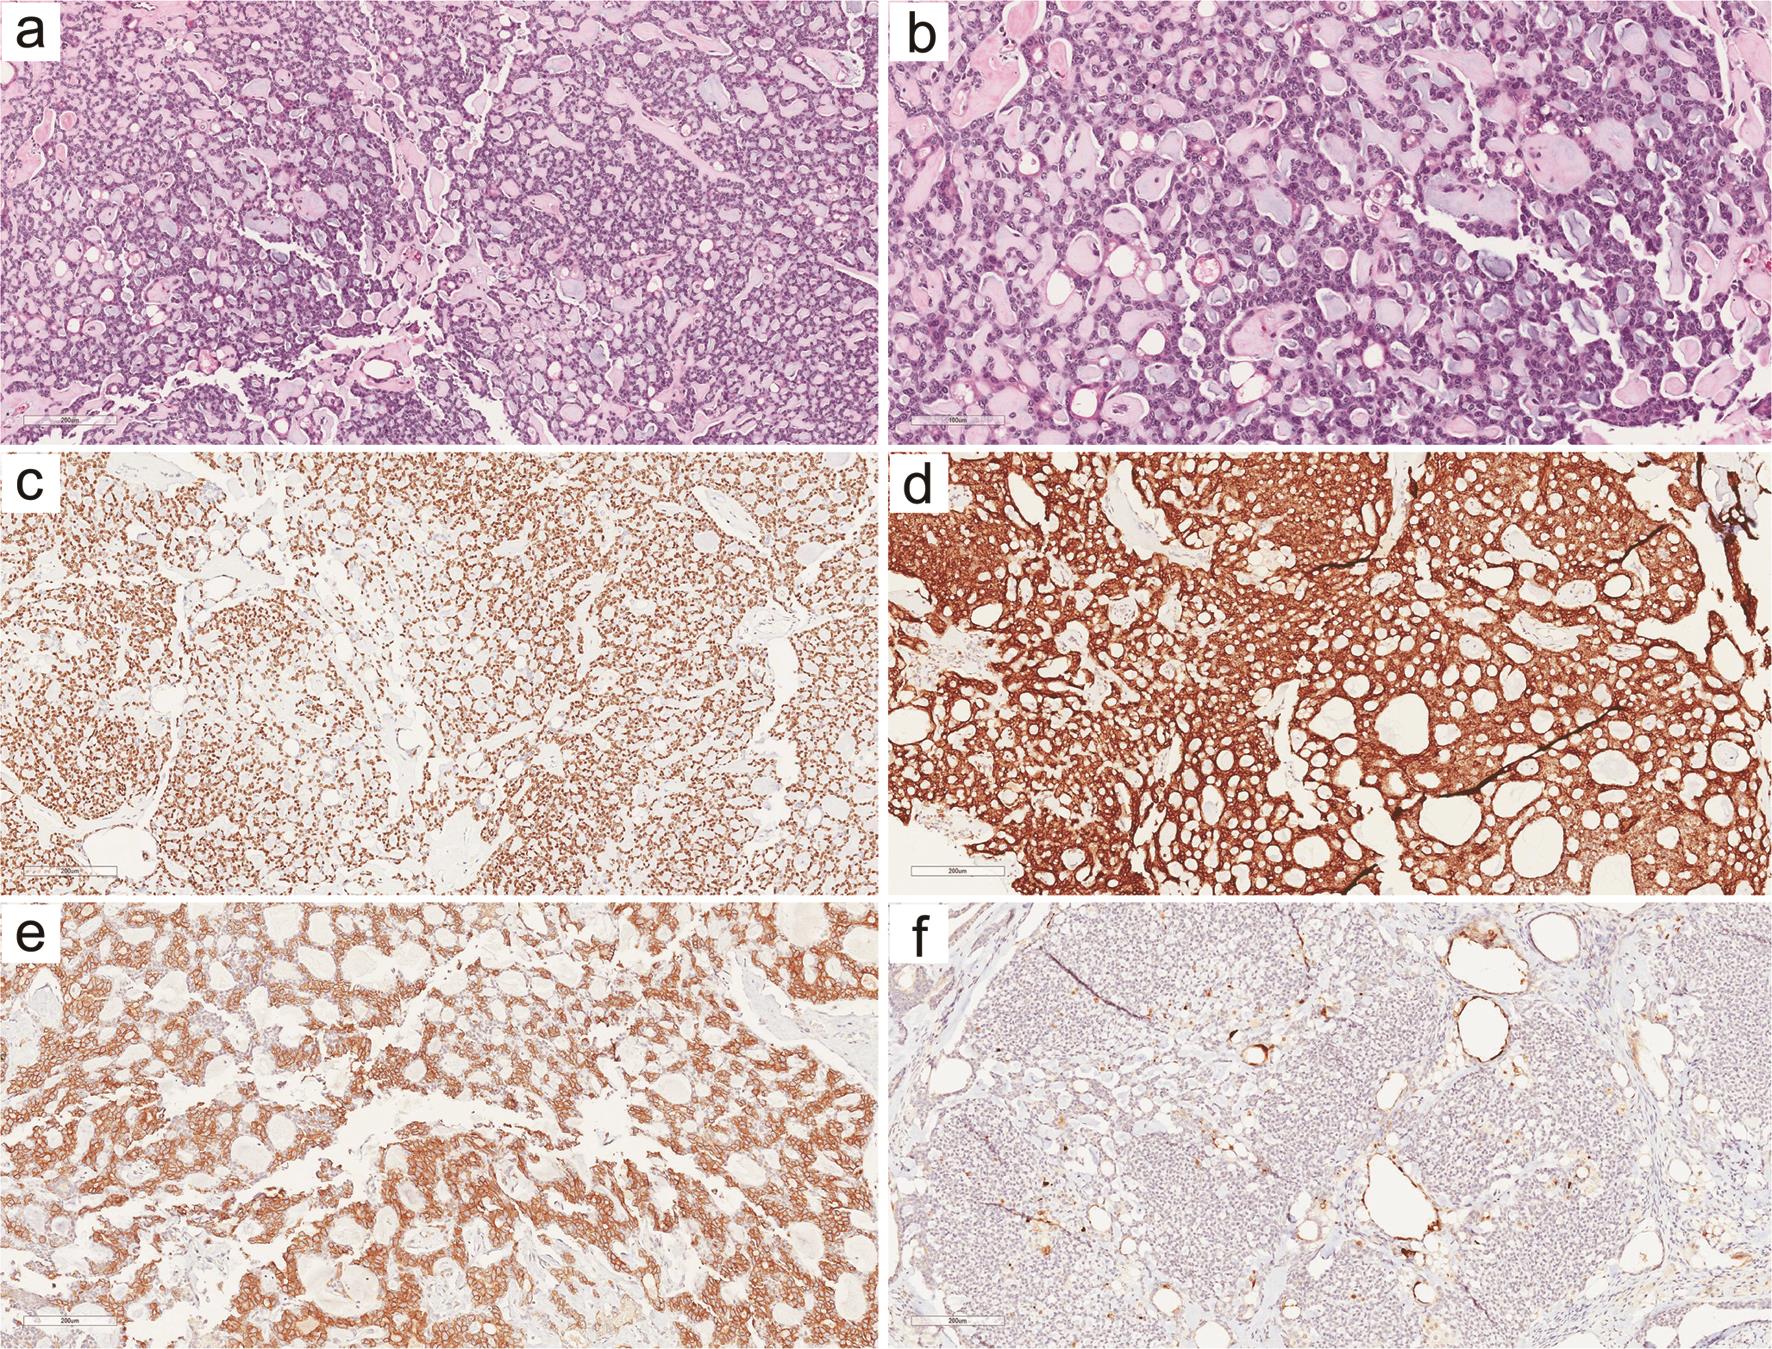 Classic adenoid cystic carcinoma of the breast shows cribriform growth pattern (a). Eosinophilic globular material is present in the lumen of cribriform structures, which are composed of low-grade basaloid tumor cells (b). P63 is positive in the basaloid cells (c). Luminal epithelial cells are diffusely positive for CK5 (d) and c-Kit (CD117) (e). The tumor cells are negative for ER (f), GATA3 (g) and Trichorhinophalangeal syndrome type 1 (TRPS1) (h). b, ×20; others, ×10.